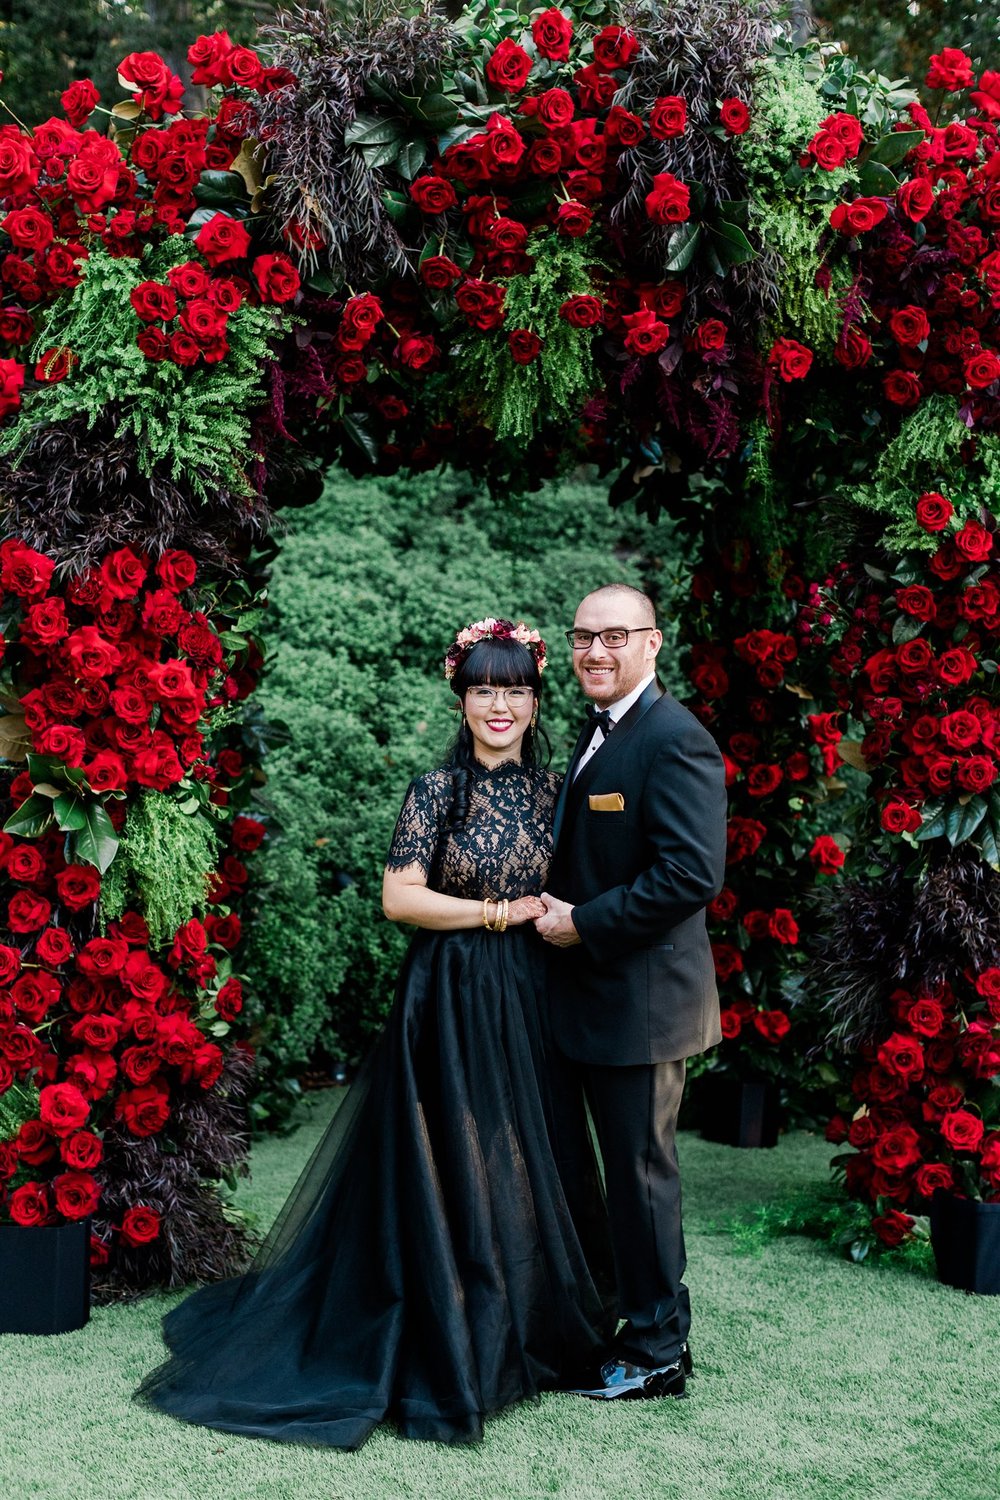 JOWY-Productions-Vibrant-Wedding-in-Red-and-Black-Hues-Valorie-Darling-8.jpg